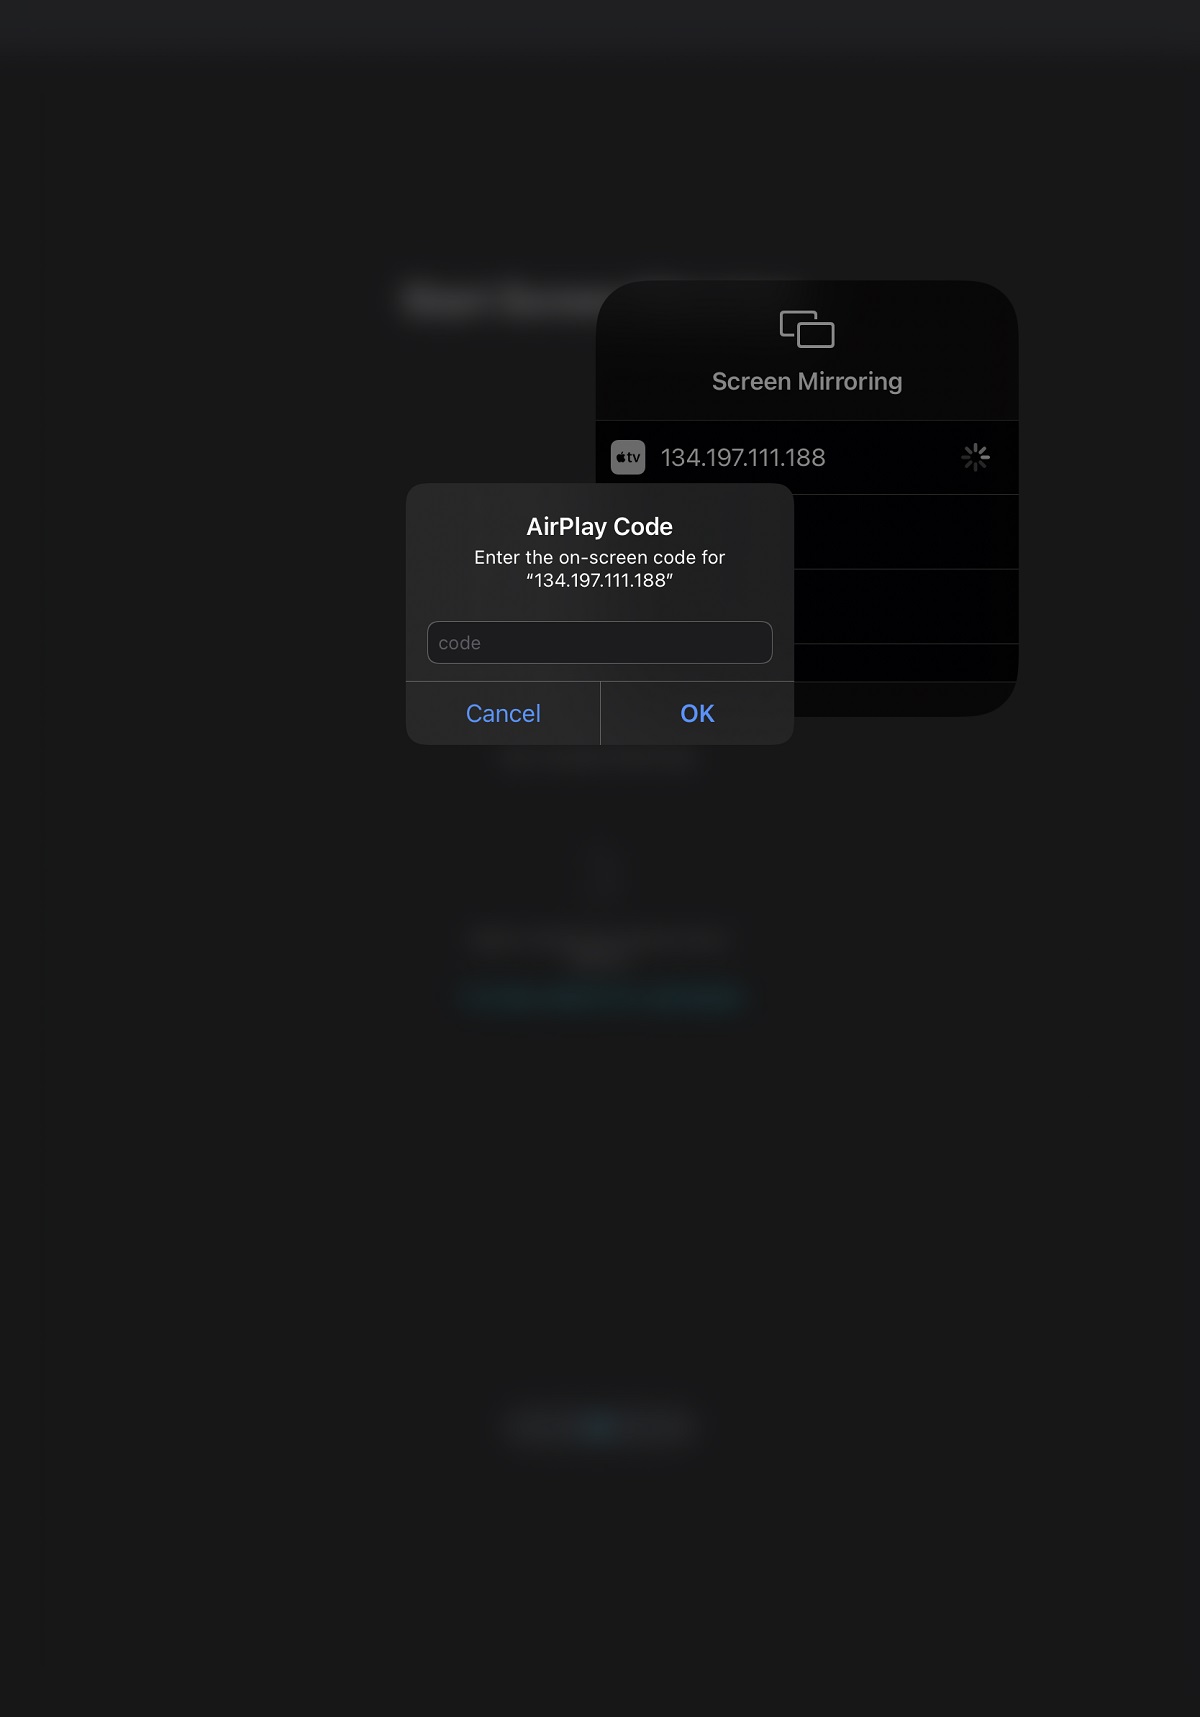 Screenshot of the AirPlay Code entry interface in iOS, prompting for the entry of the 4-digit code that matches the IP address selected in the previous step.